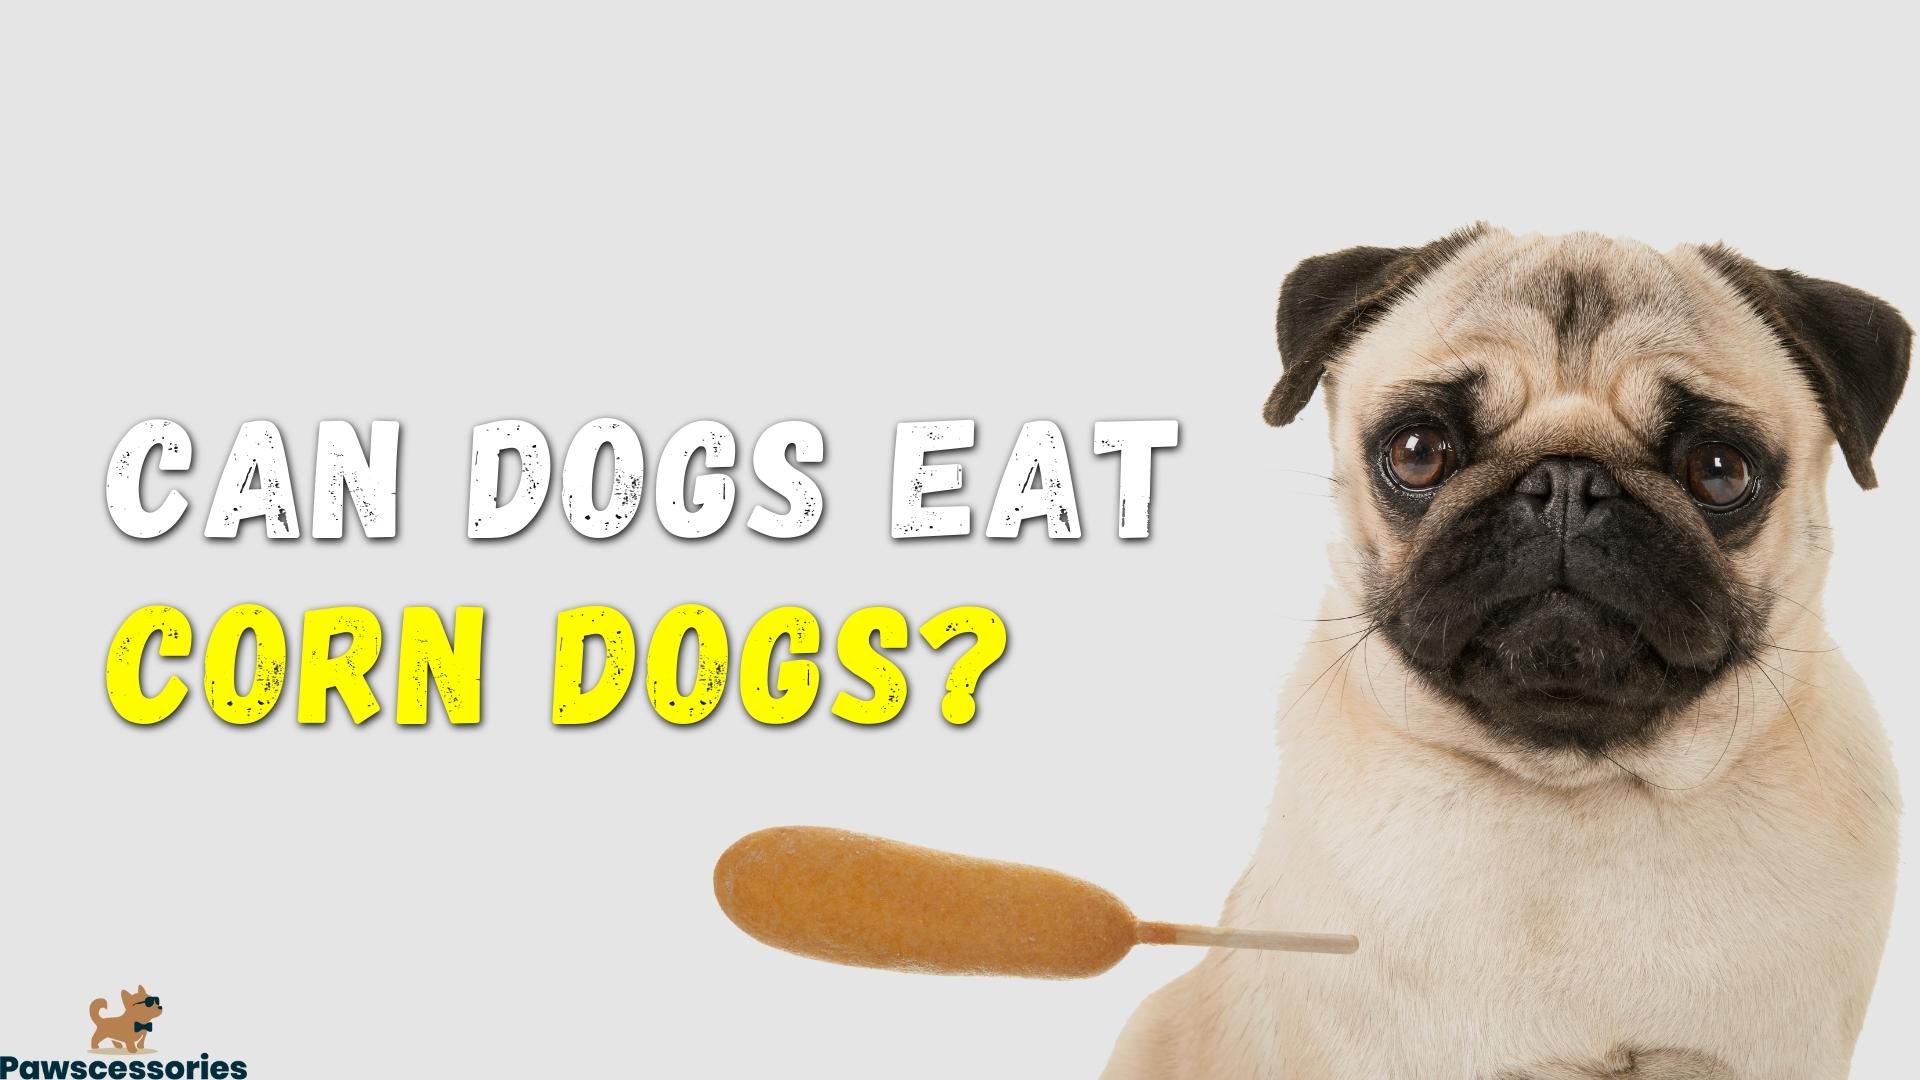 Can dogs eat corn dogs